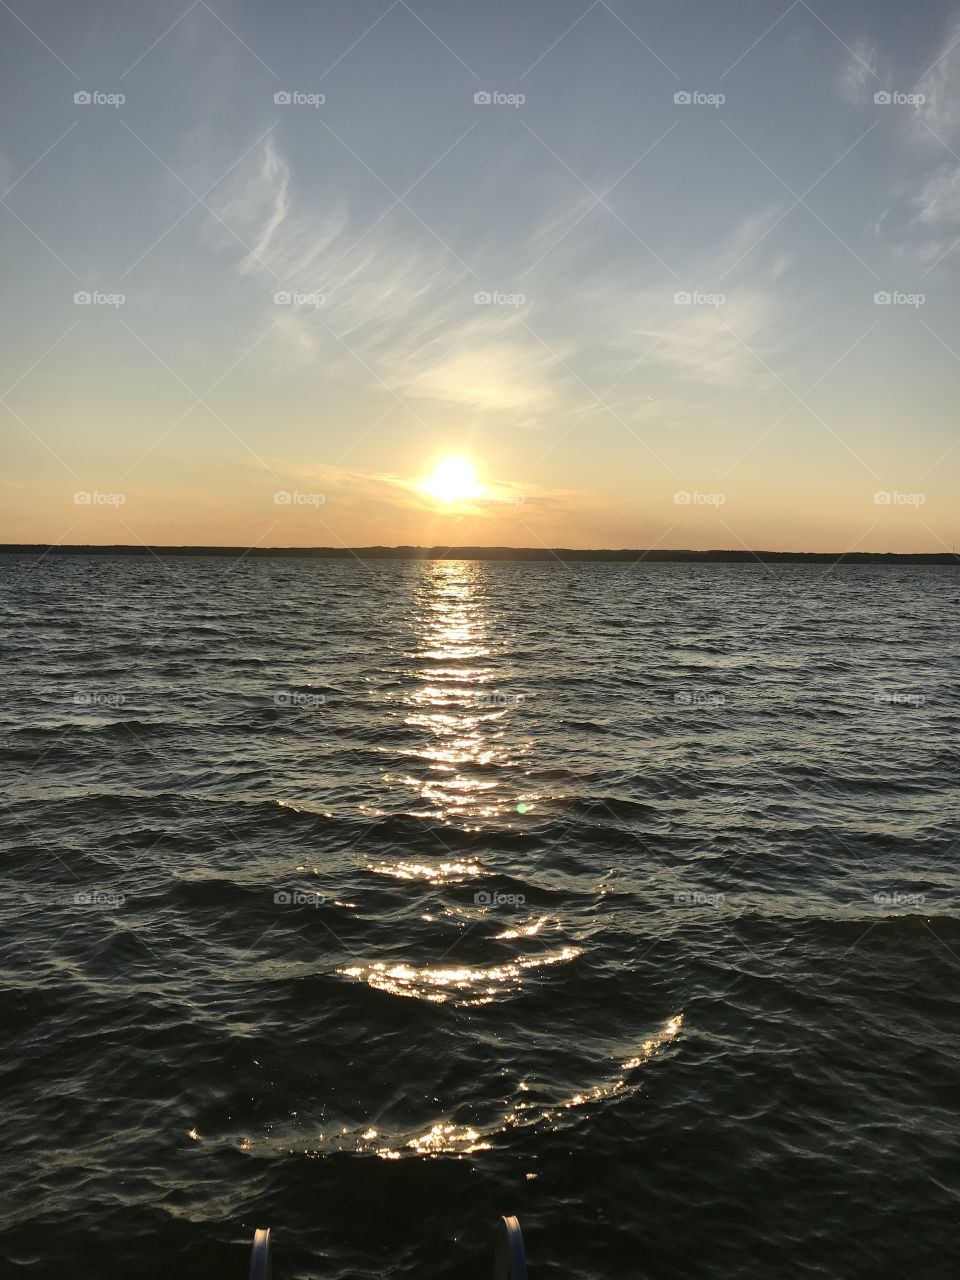 Sun hitting the water at the right moment 